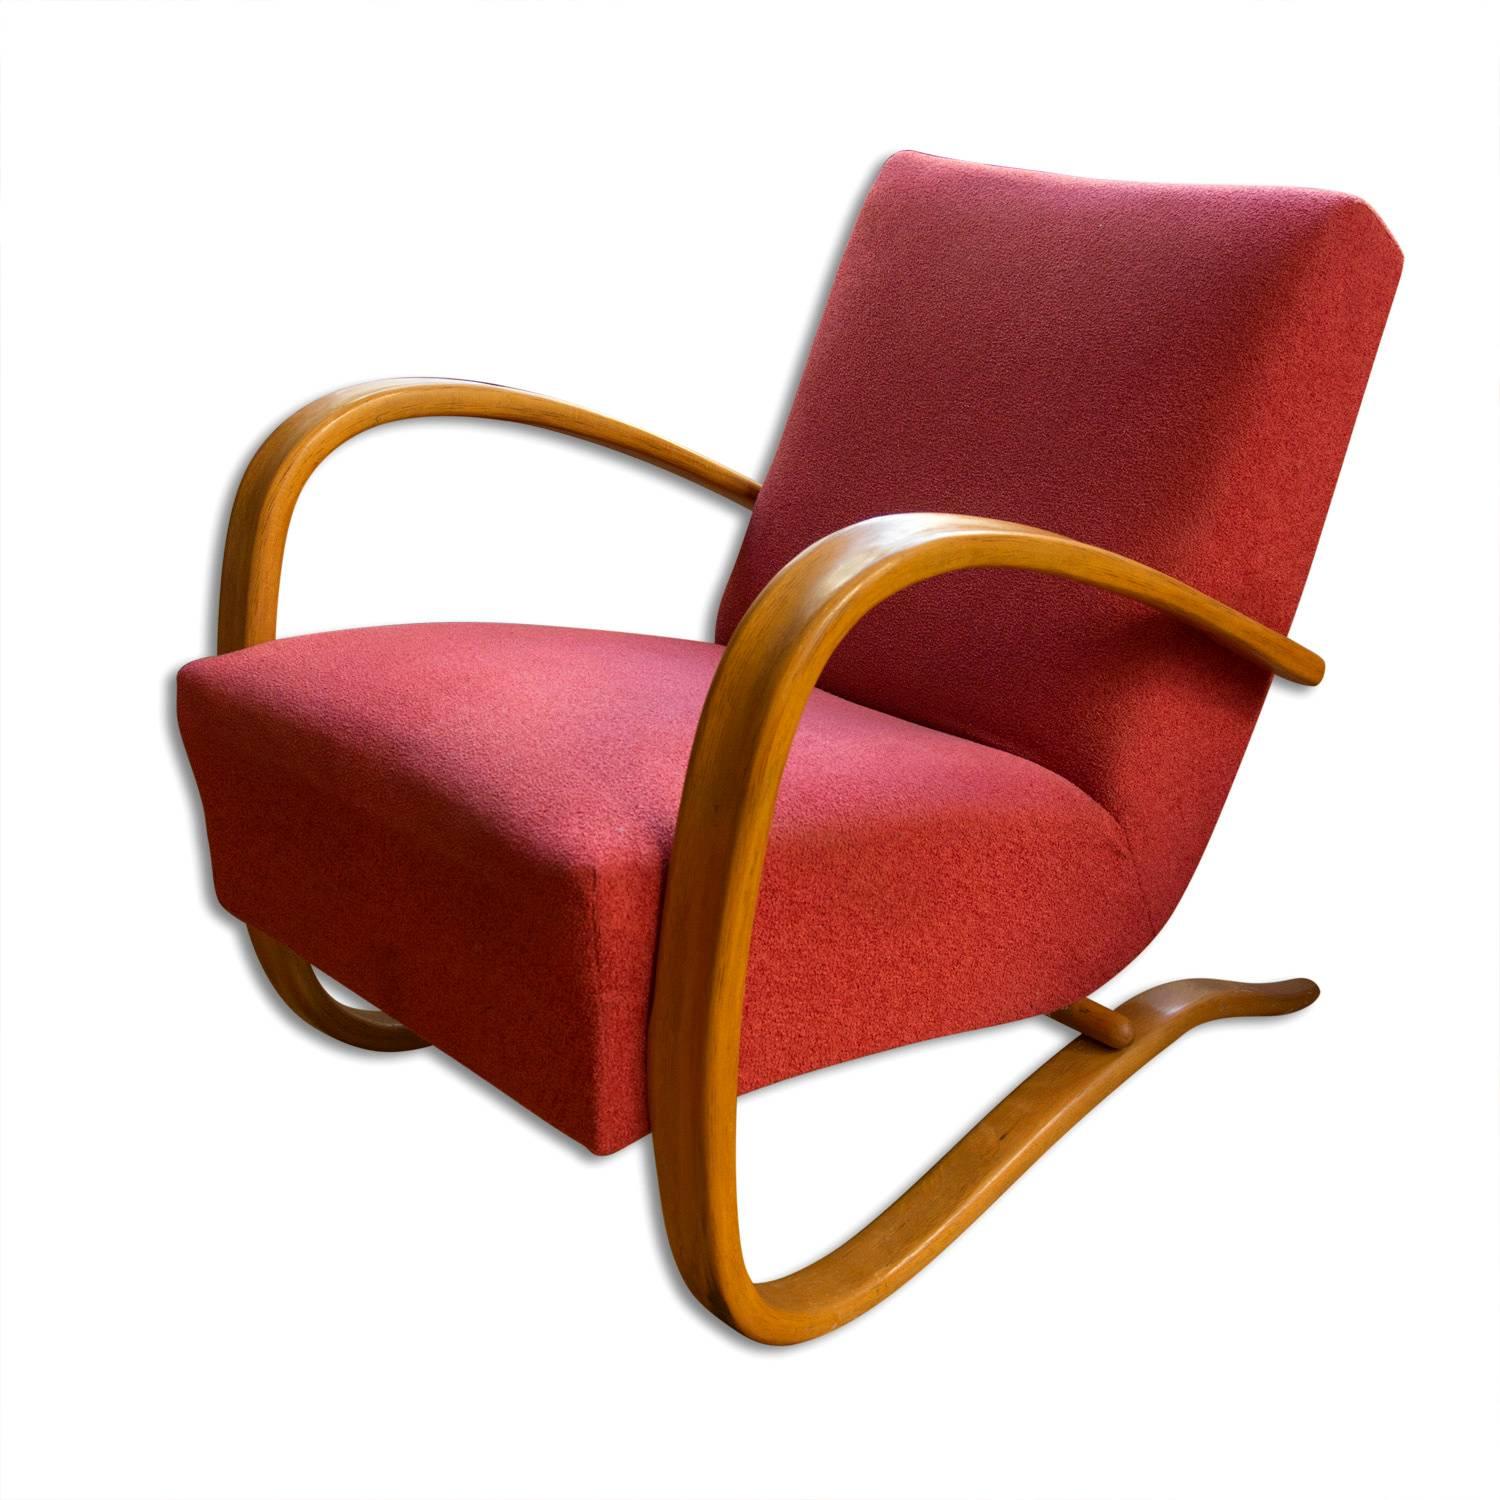 Czech Pair of H-269 Armchairs Designed by Jindrich Halabala for UP Závody Brno